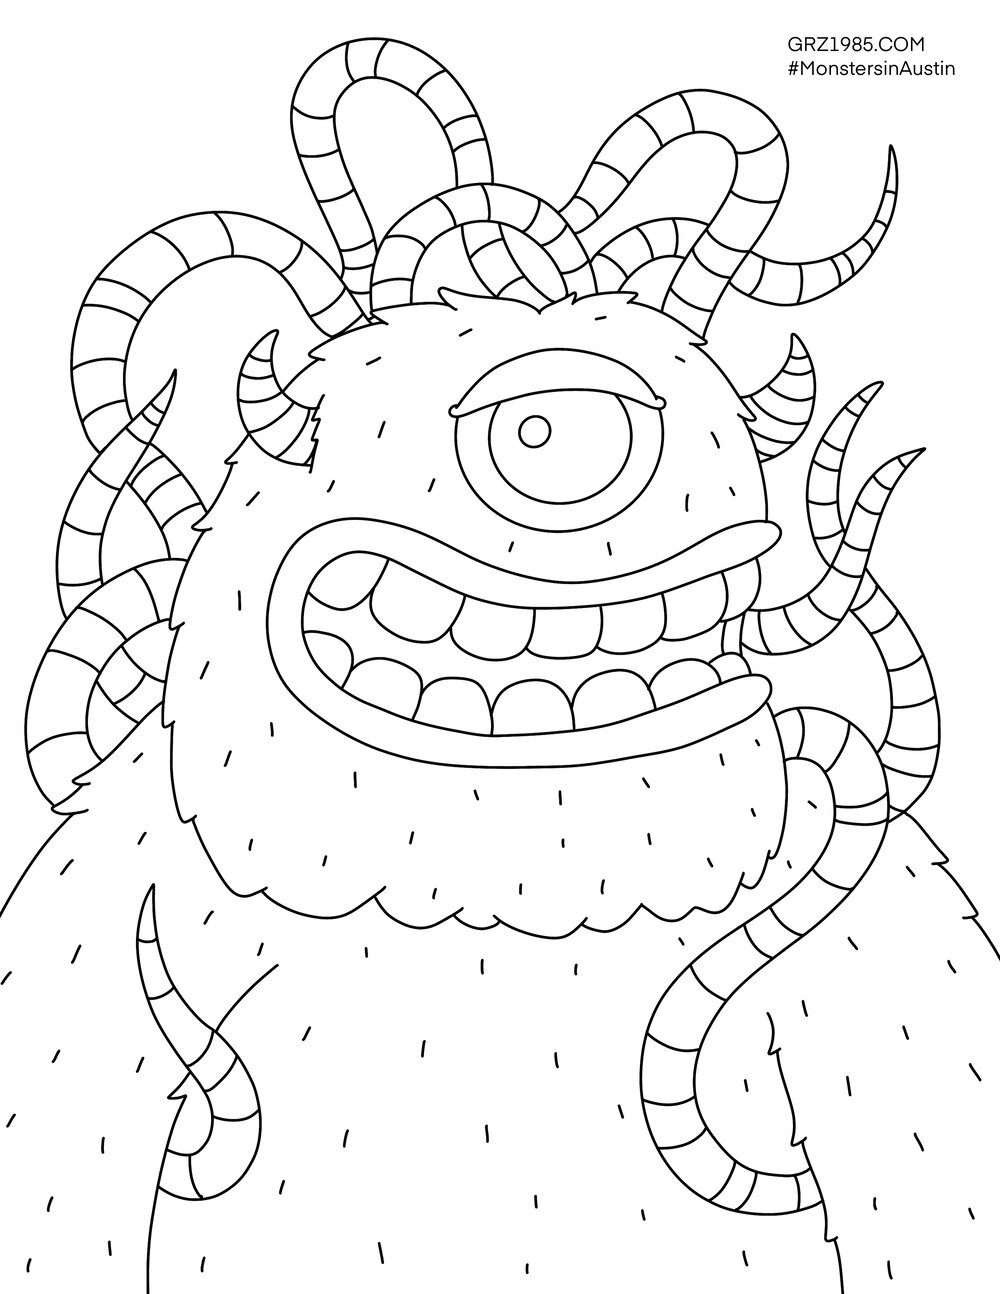 Stickers gift cards y mas âmonster coloring pages volii